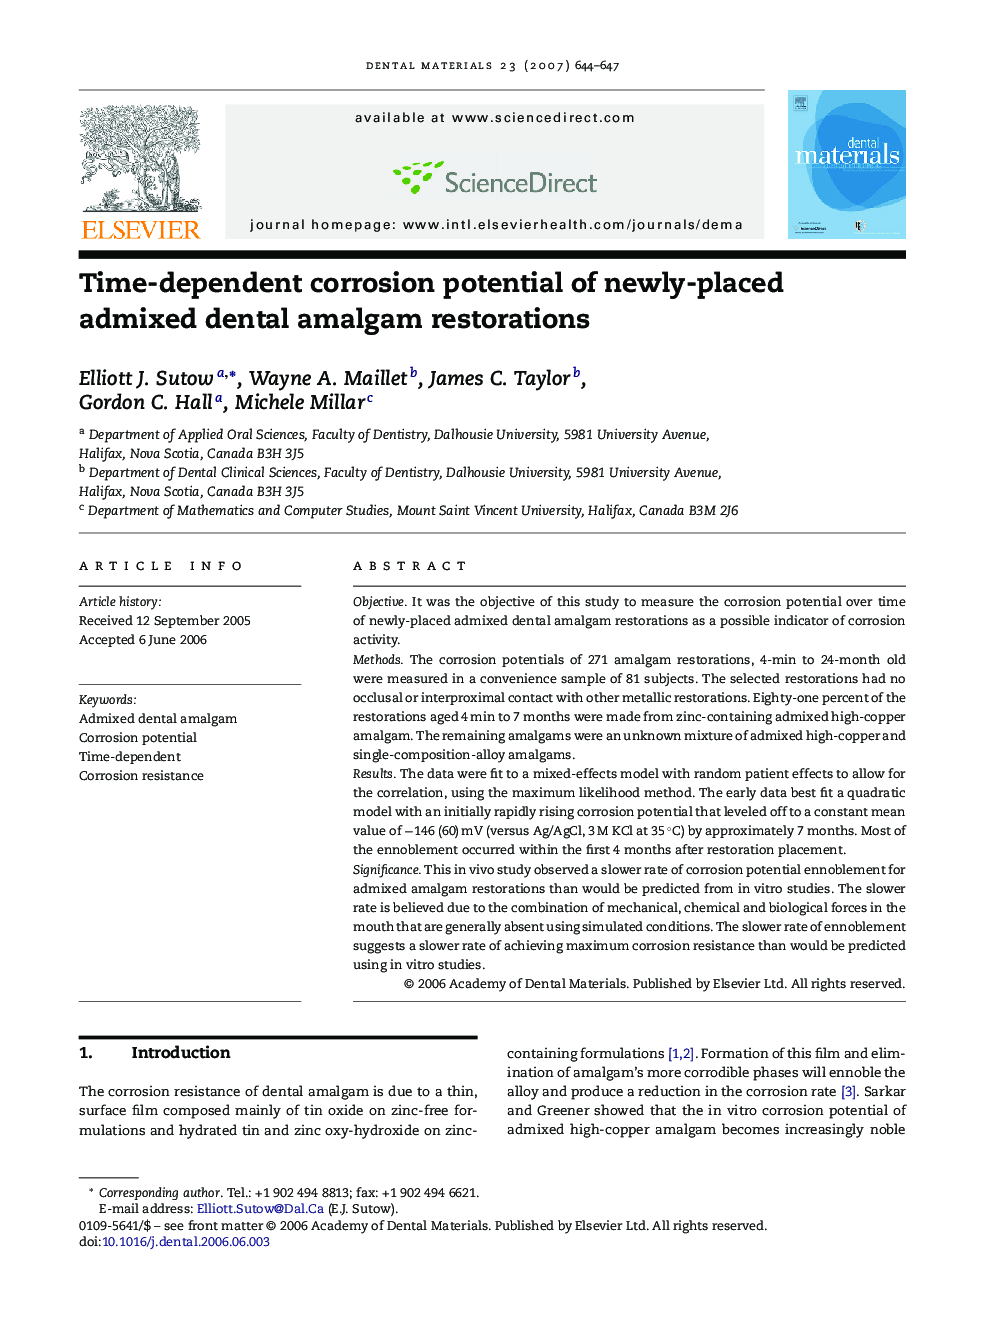 Time-dependent corrosion potential of newly-placed admixed dental amalgam restorations